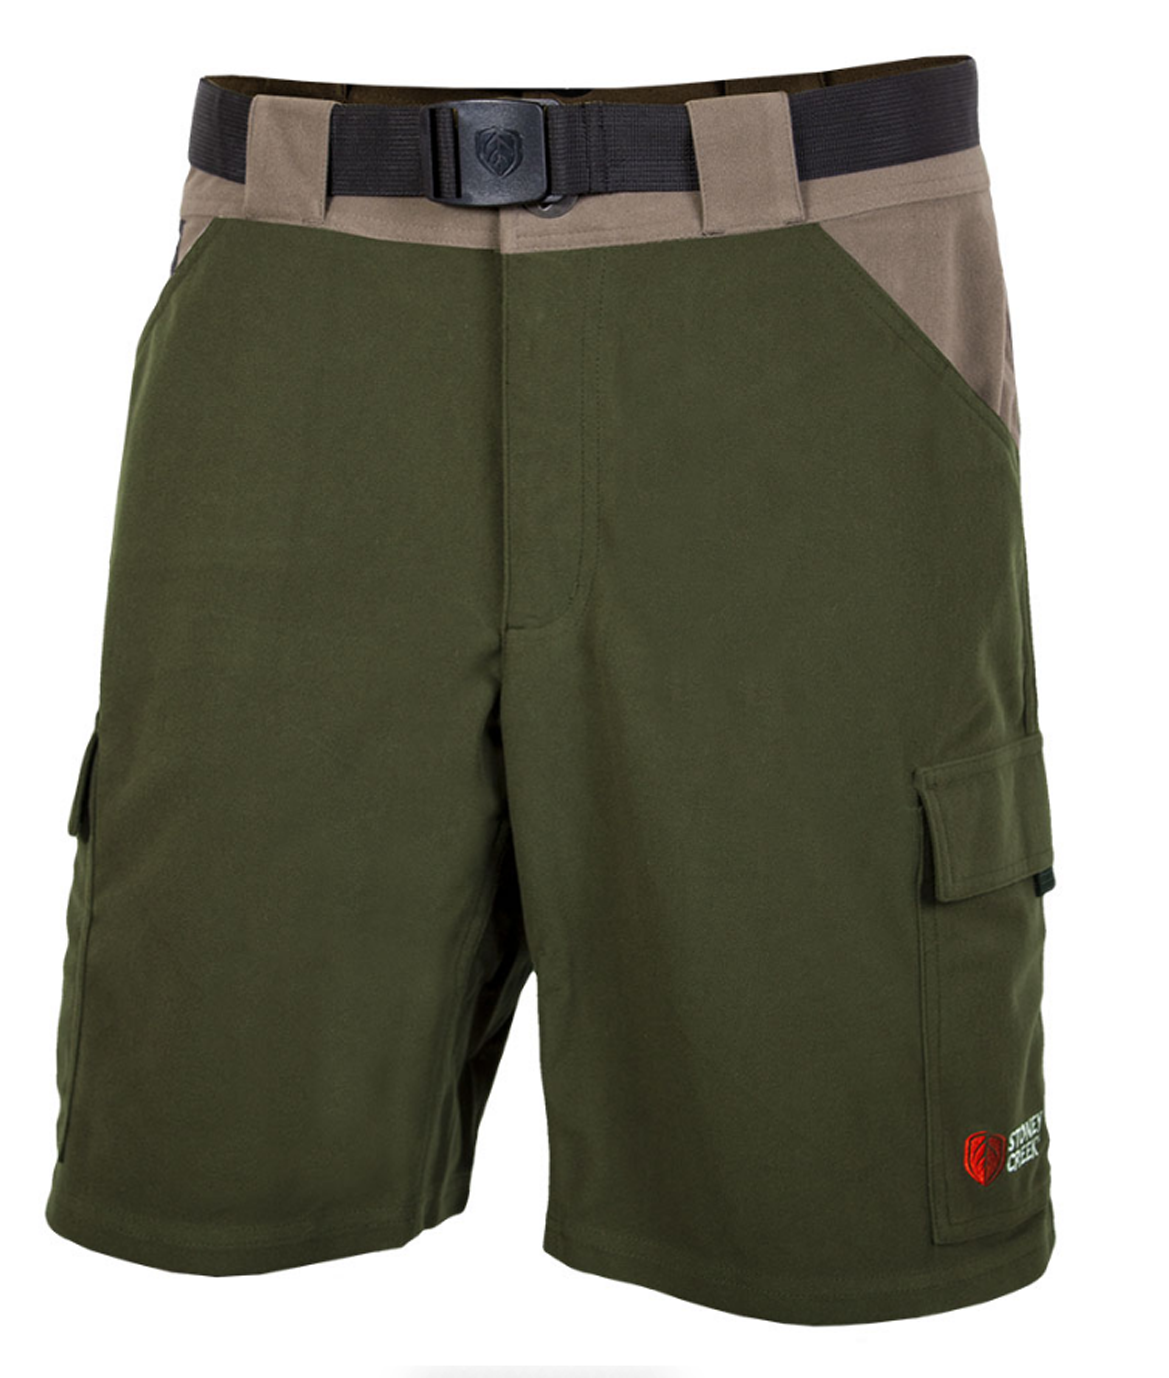 A Pair Of Green Shorts With A Belt